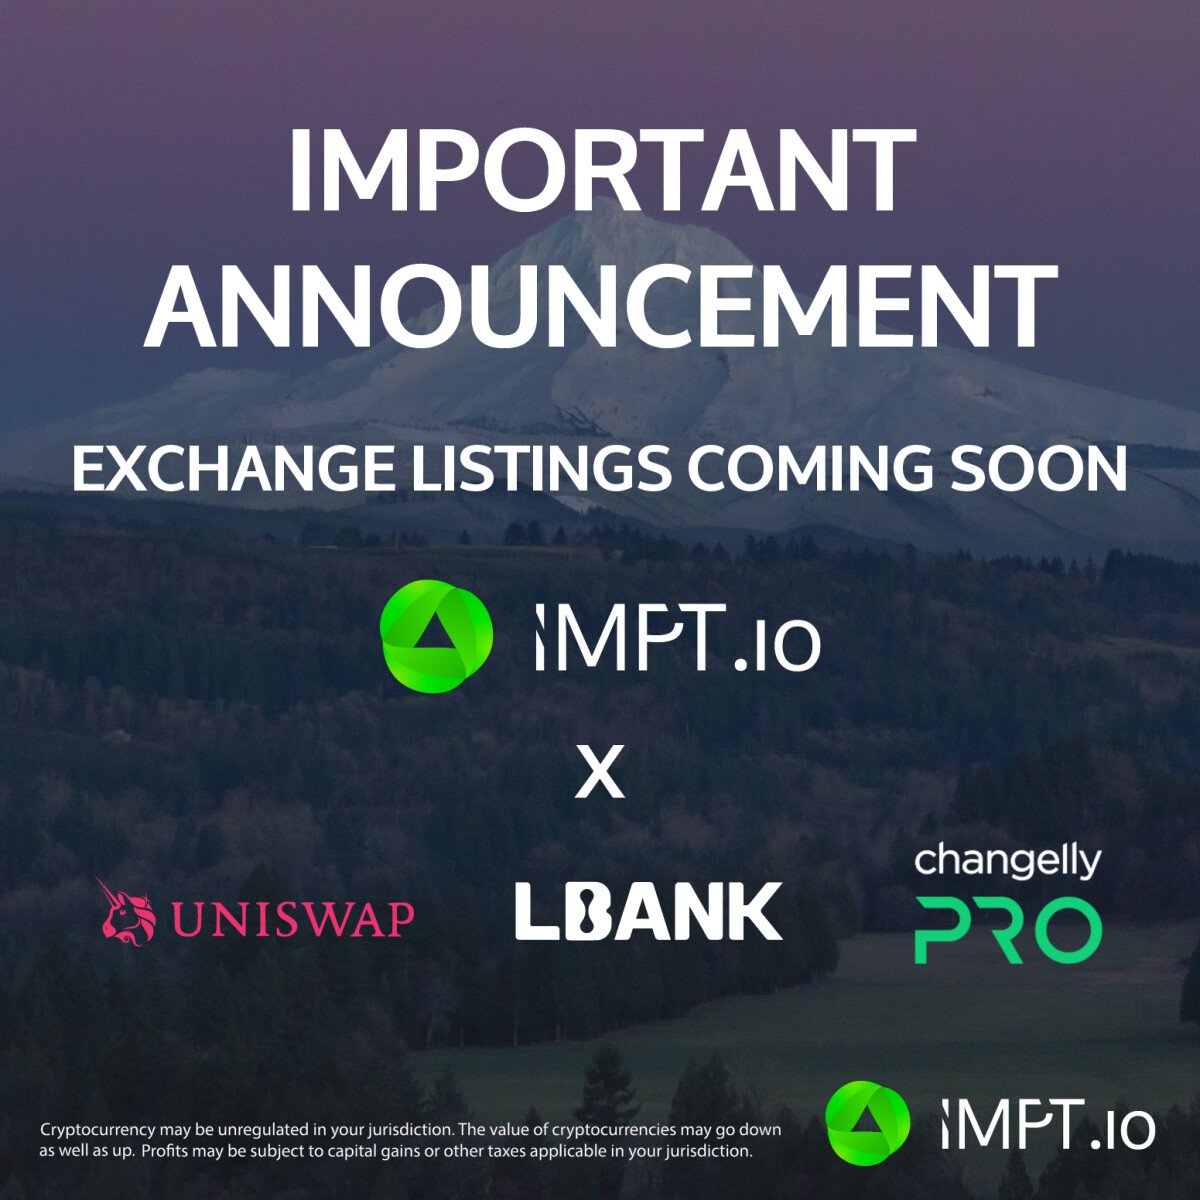 impt-exchange-listings-confirmed-for-14th-december-1-week-left-to-buy-this-usd13-5-million-green-crypto